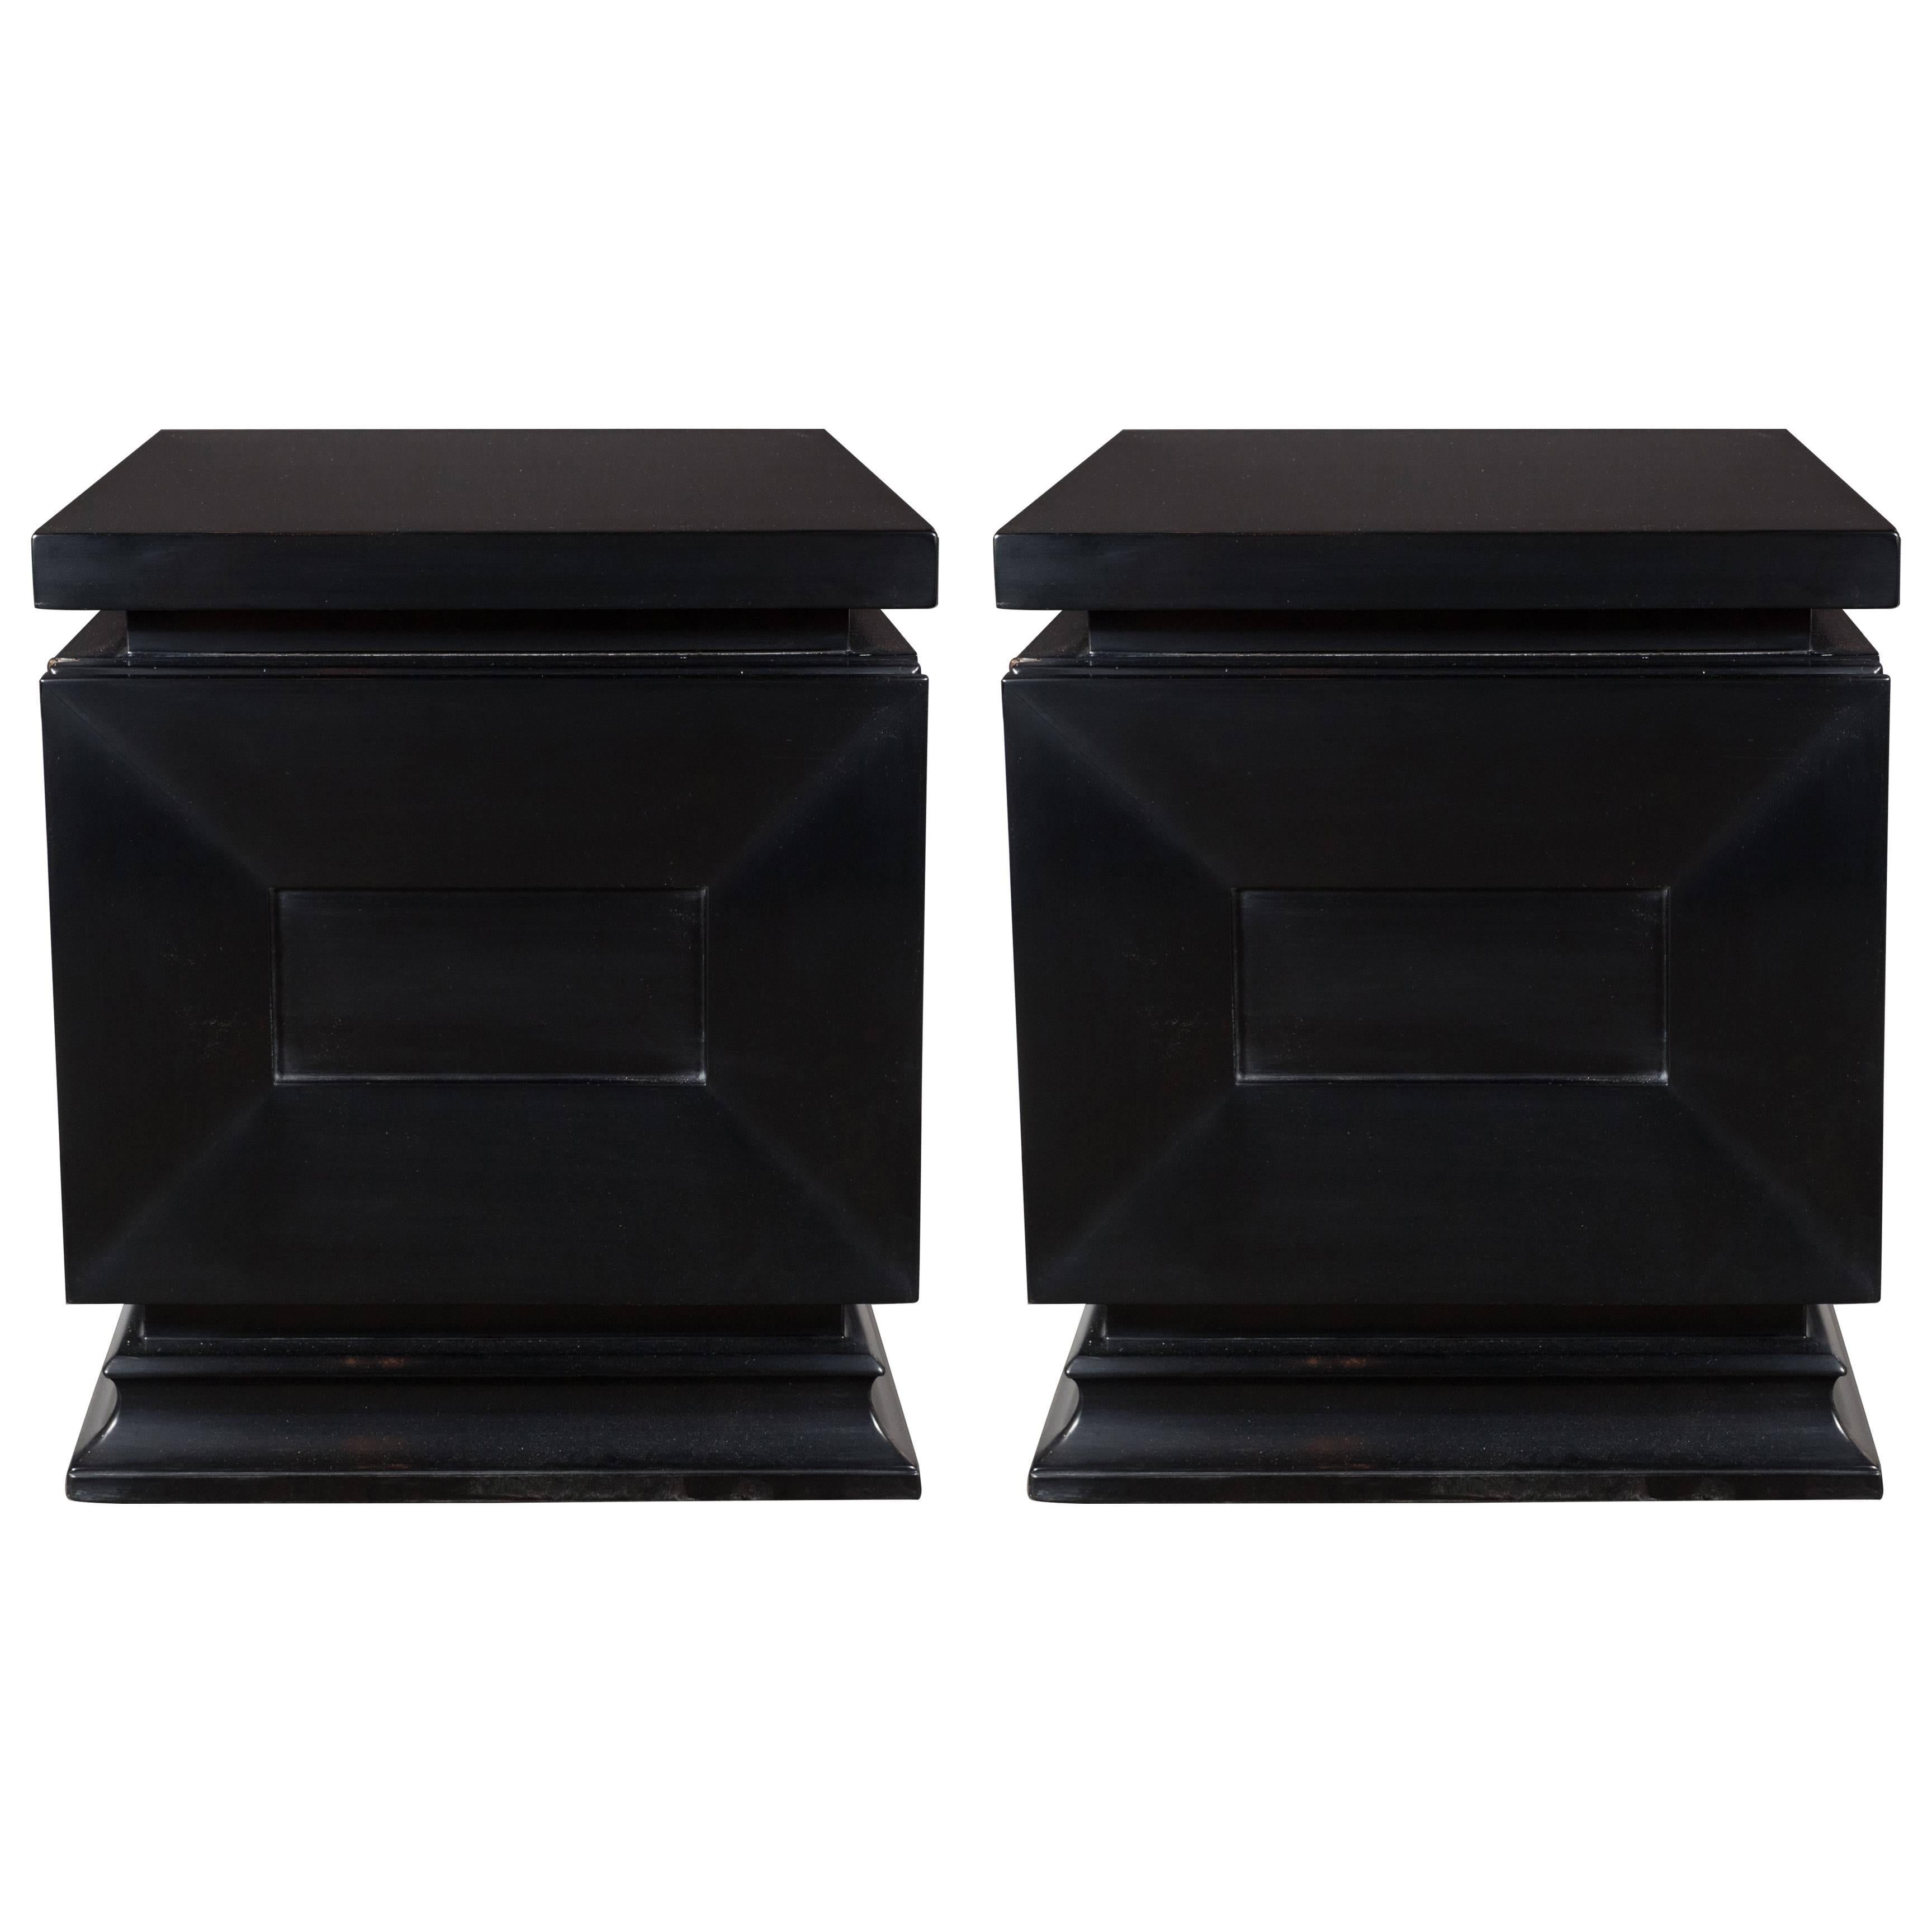 Pair of Mid-Century Nightstands in Ebonized Walnut with a Shadowbox Design